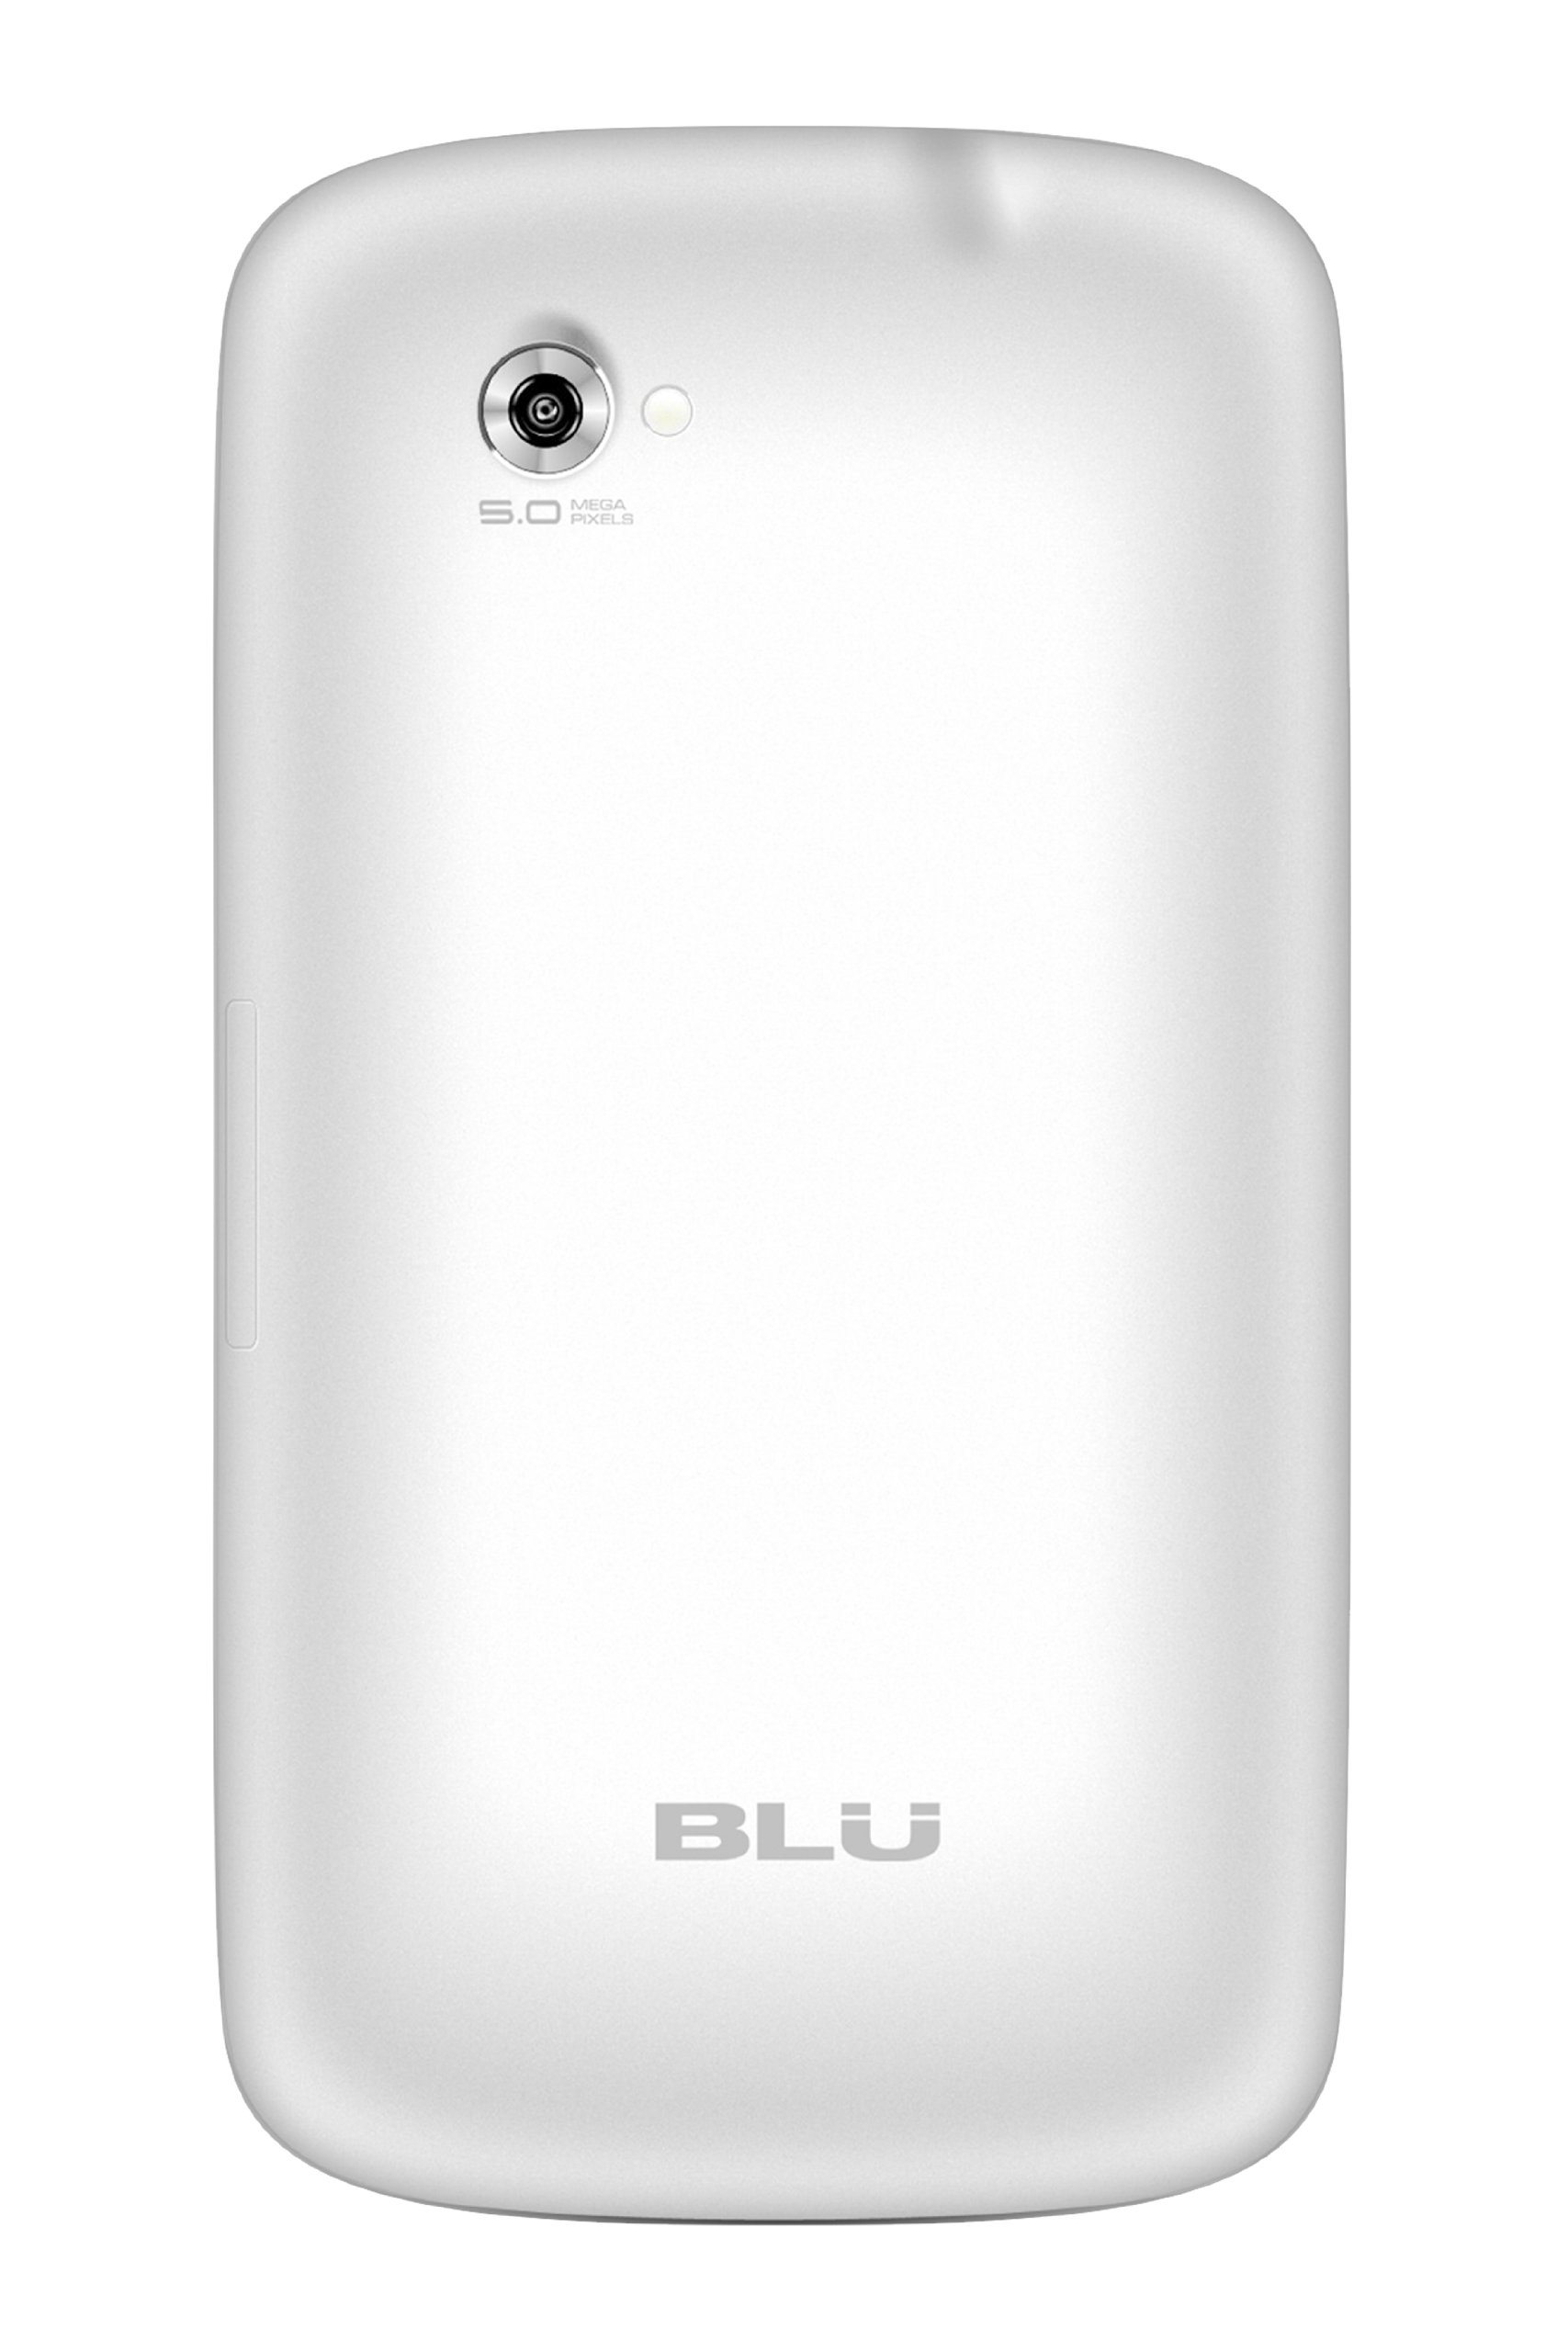 BLU Studio 5.3 D510 Unlocked GSM Phone with Dual SIM, Android 2.3 OS, Touchscreen, 5MP Camera, GPS, Wi-Fi, Bluetooth, FM Radio and microSD Slot - White